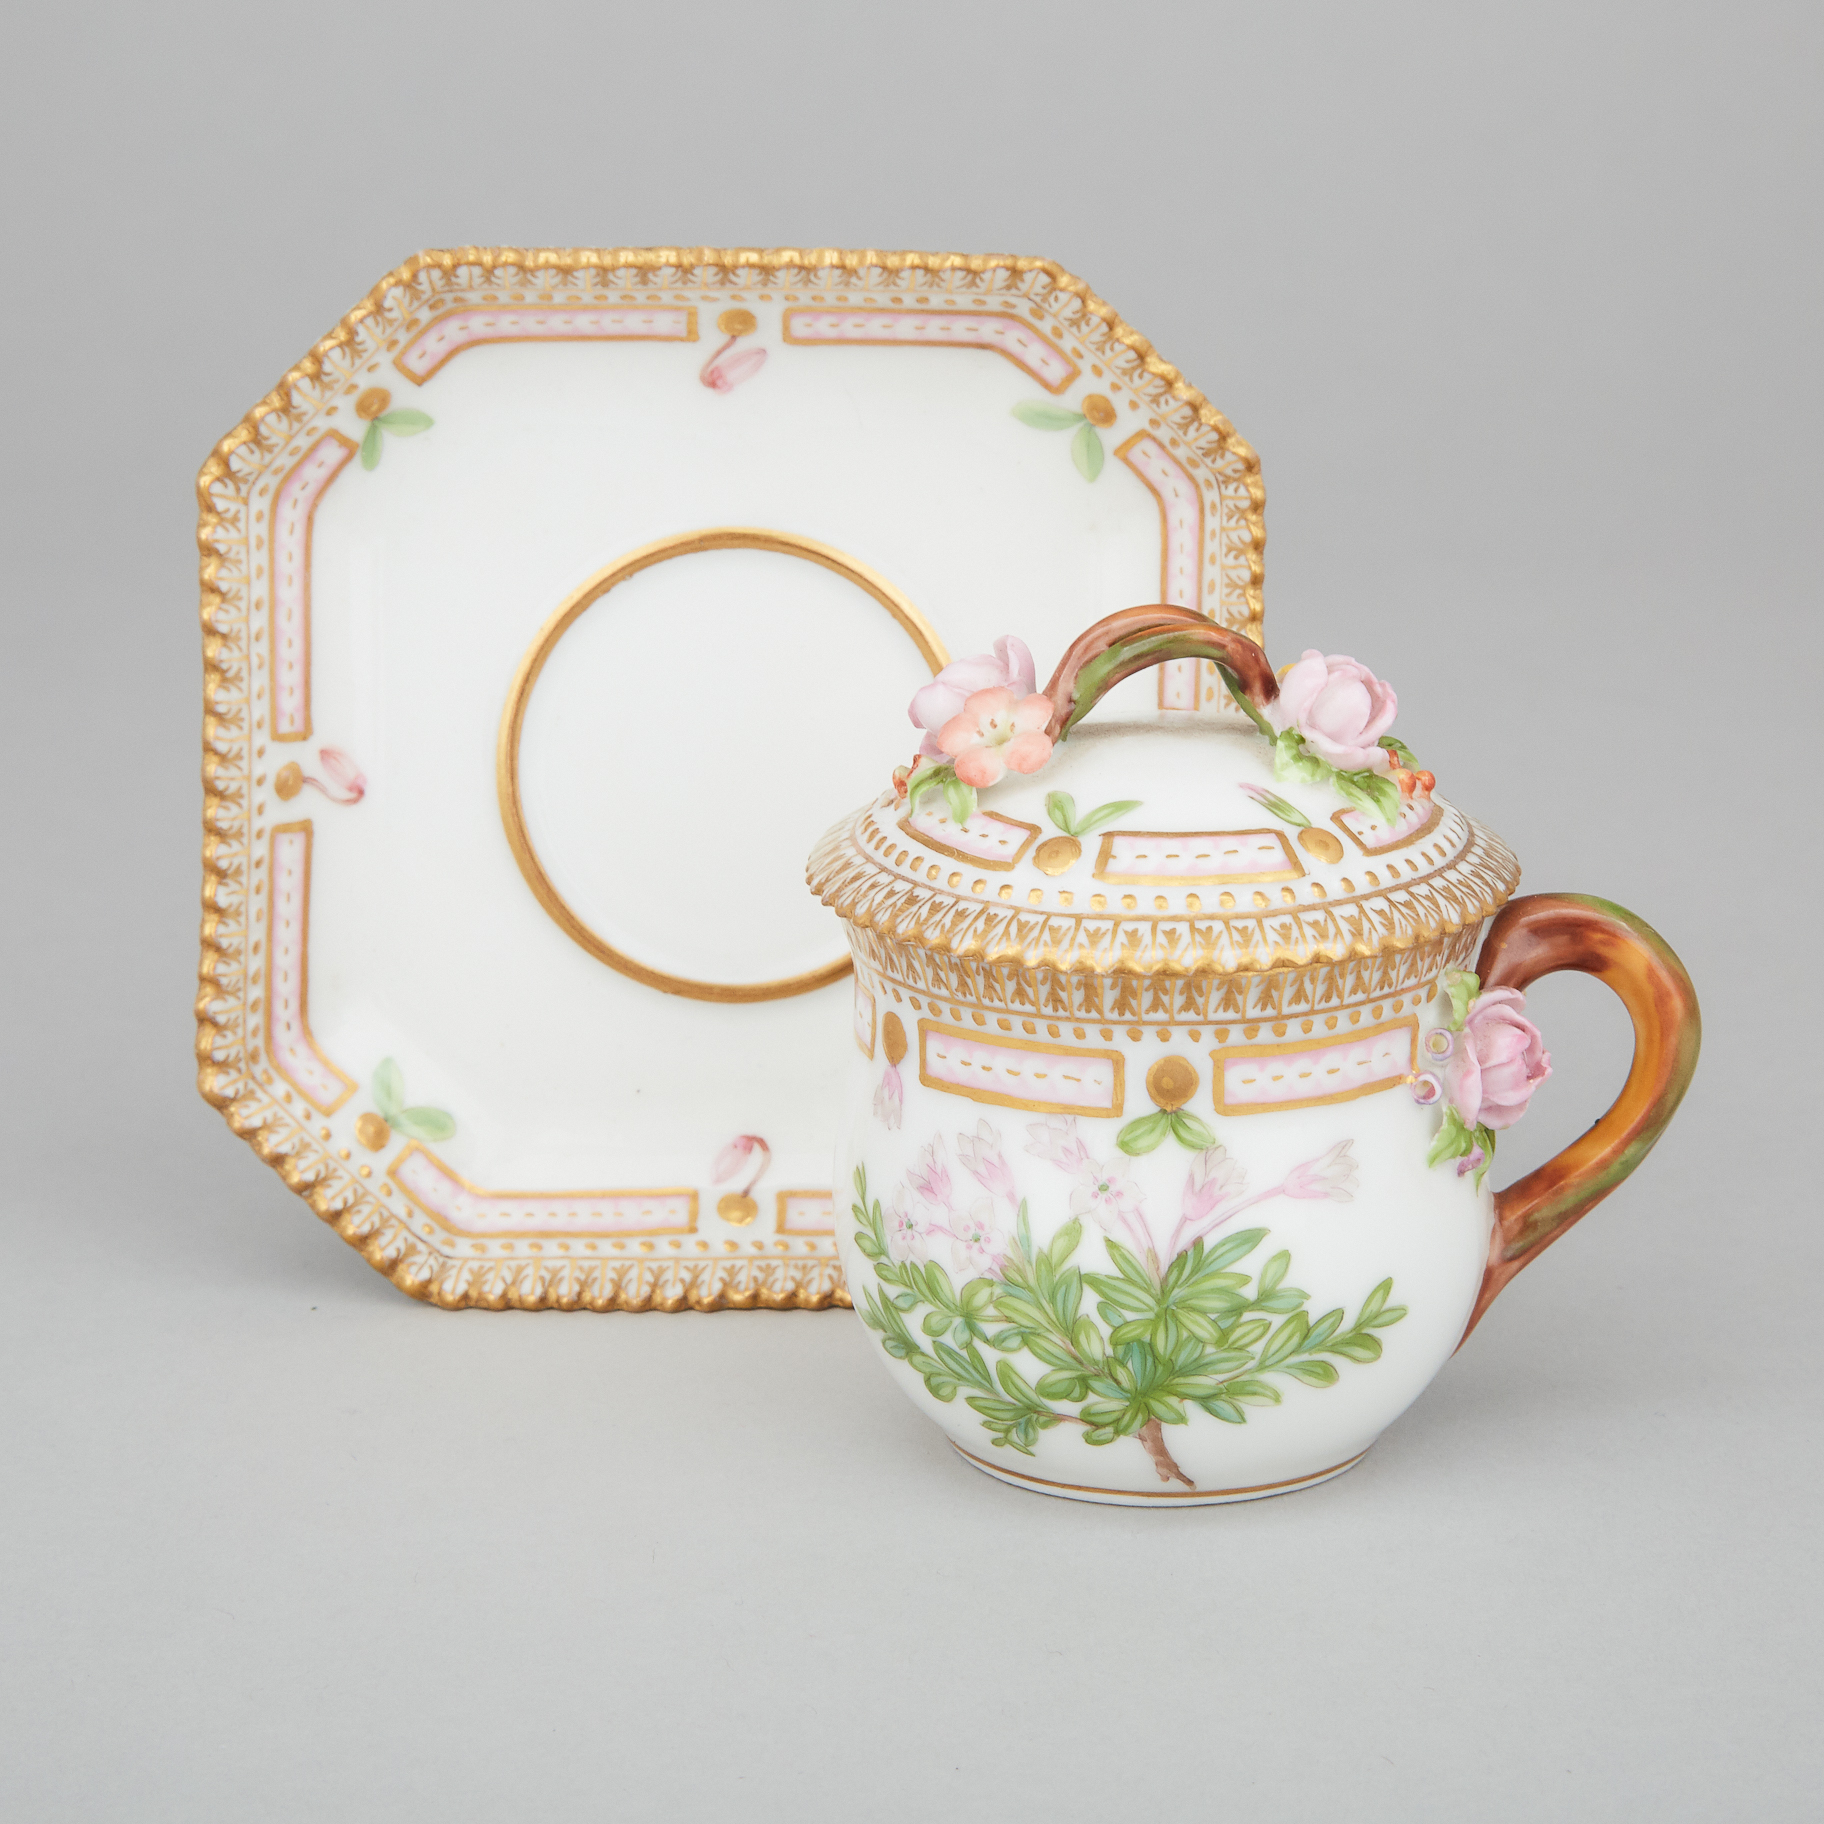 Royal Copenhagen 'Flora Danica' Custard Cup with Cover and Stand, 20th century